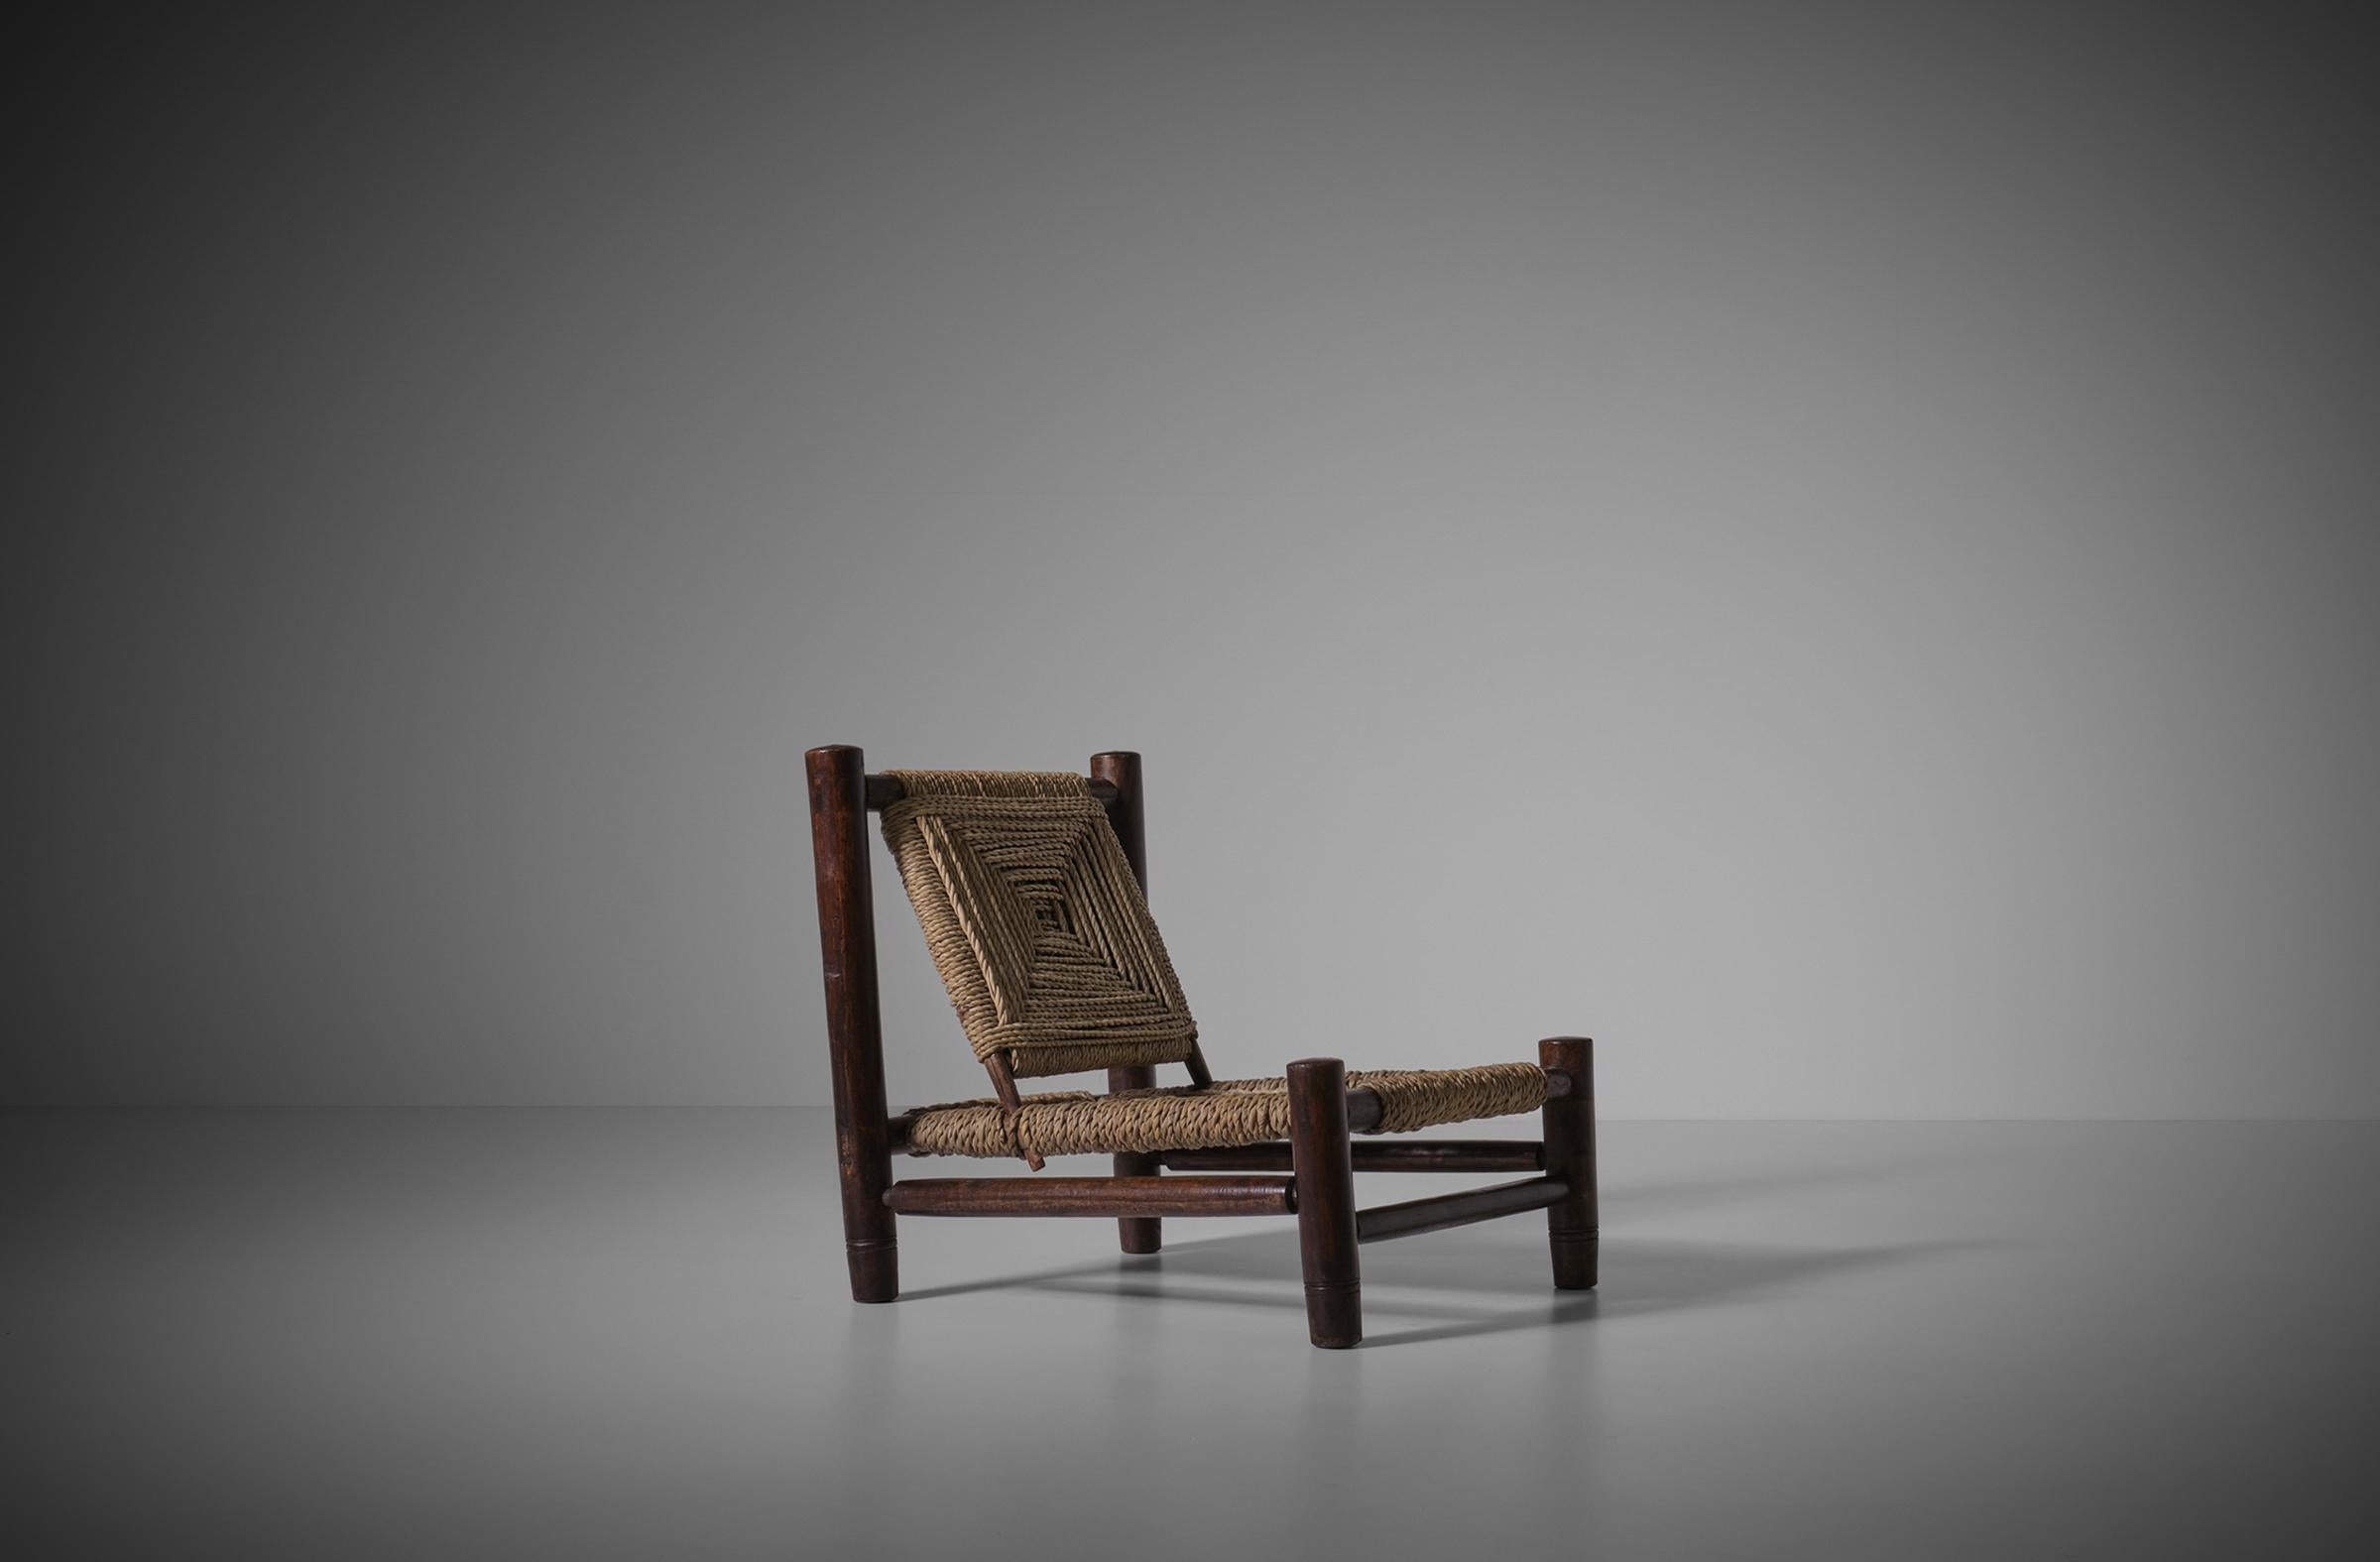 Low lounge chair, France 1960s. Rustic yet modern design made of stained wooden frame and a rope seat and backrest in a beautiful woven pattern. The modernist lines go very well together with rustic use of material. In very good original condition